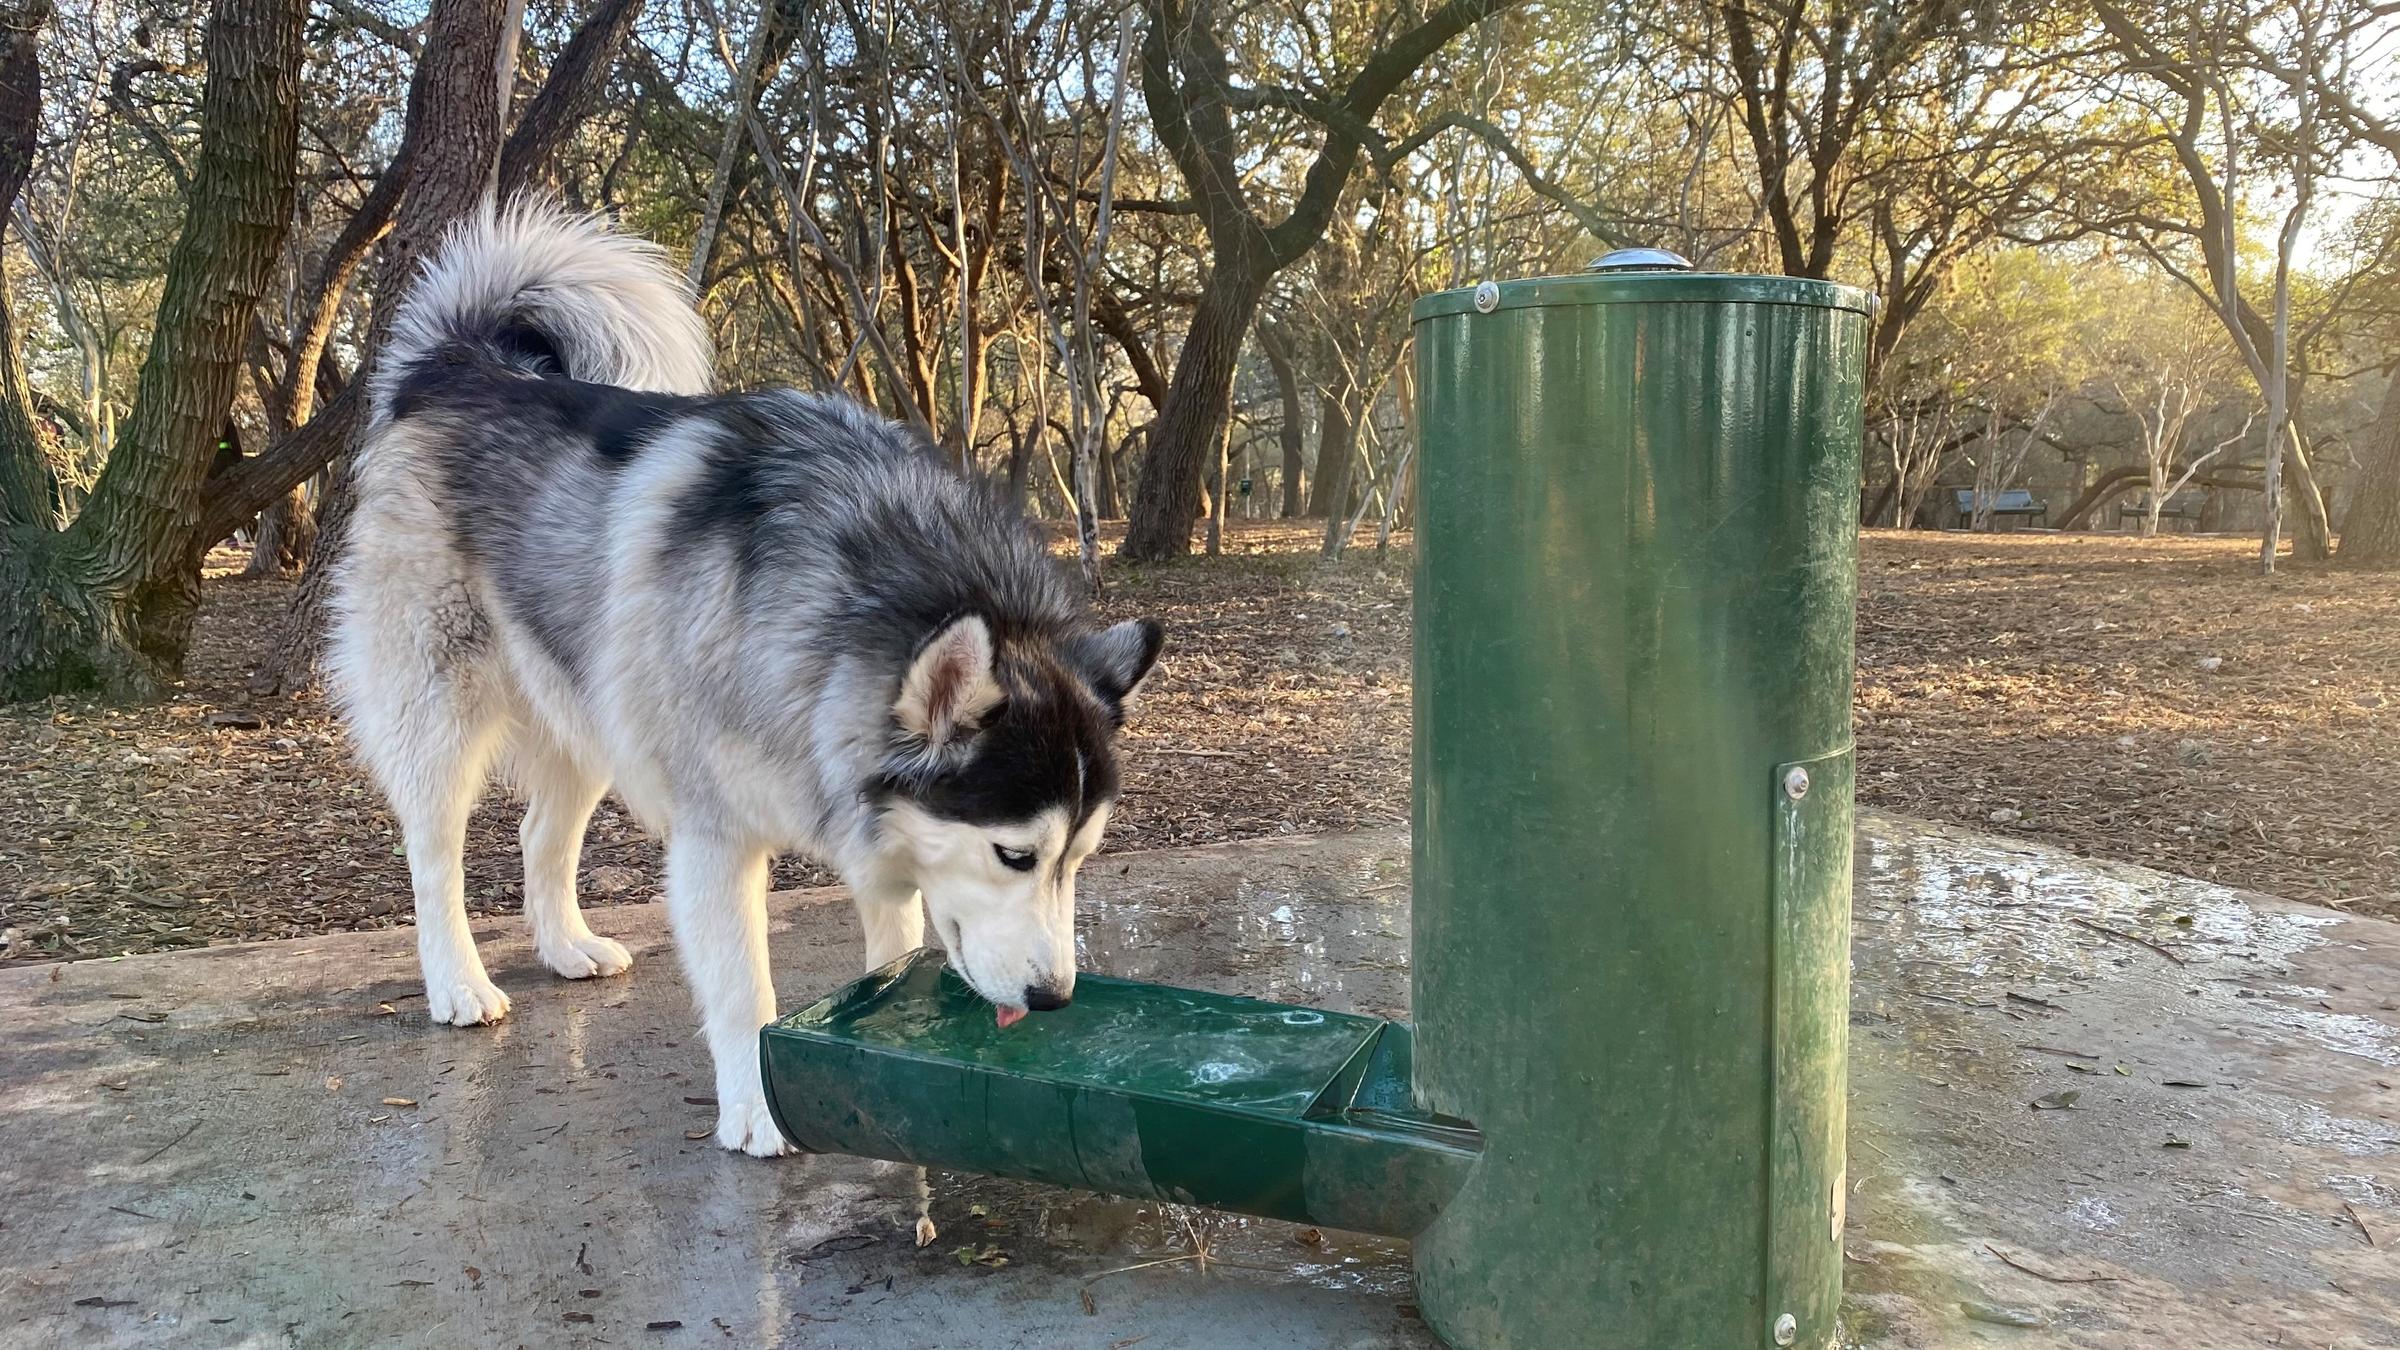 Pet Friendly Dog Park at Pearsall Park